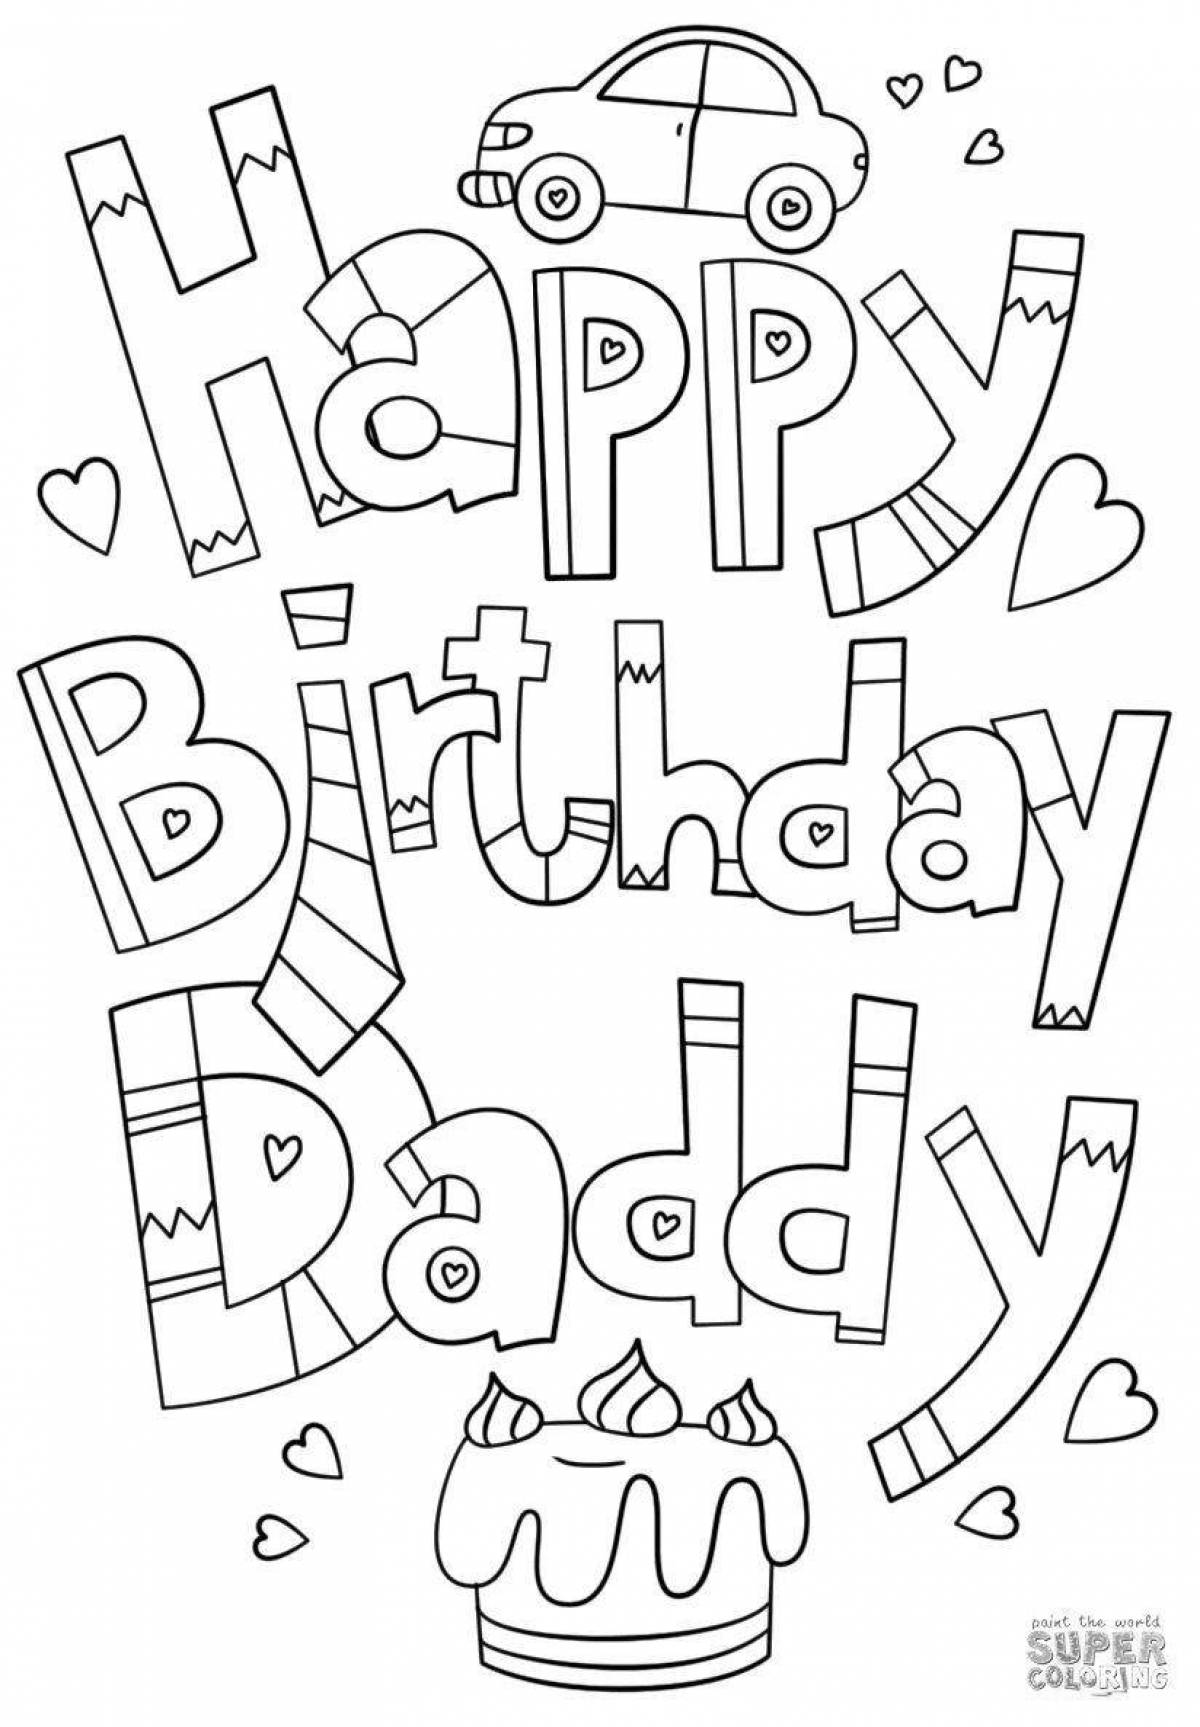 Exciting 'happy birthday dad' coloring book from daughter